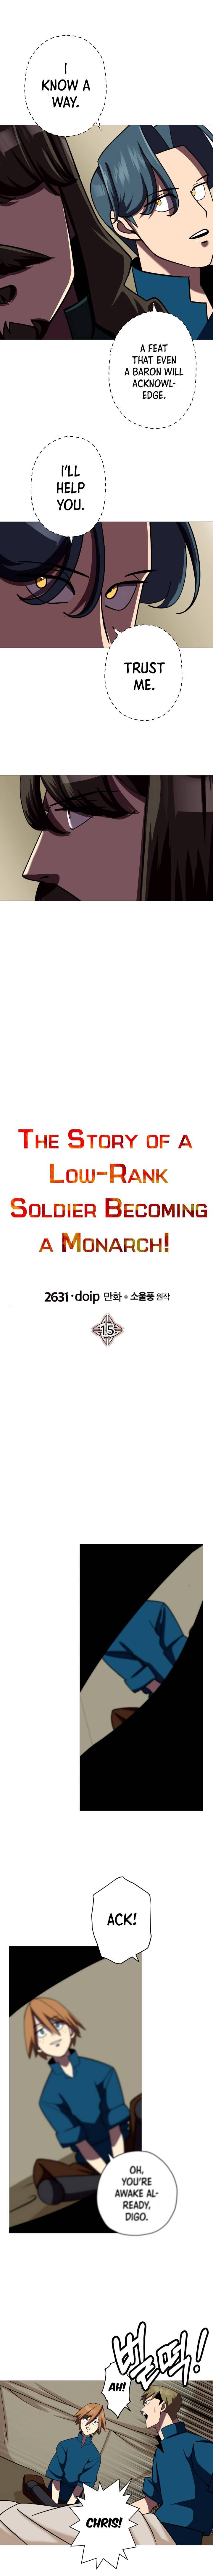 The Story of a Low-Rank Soldier Becoming a Monarch. Chapter 15 page 4